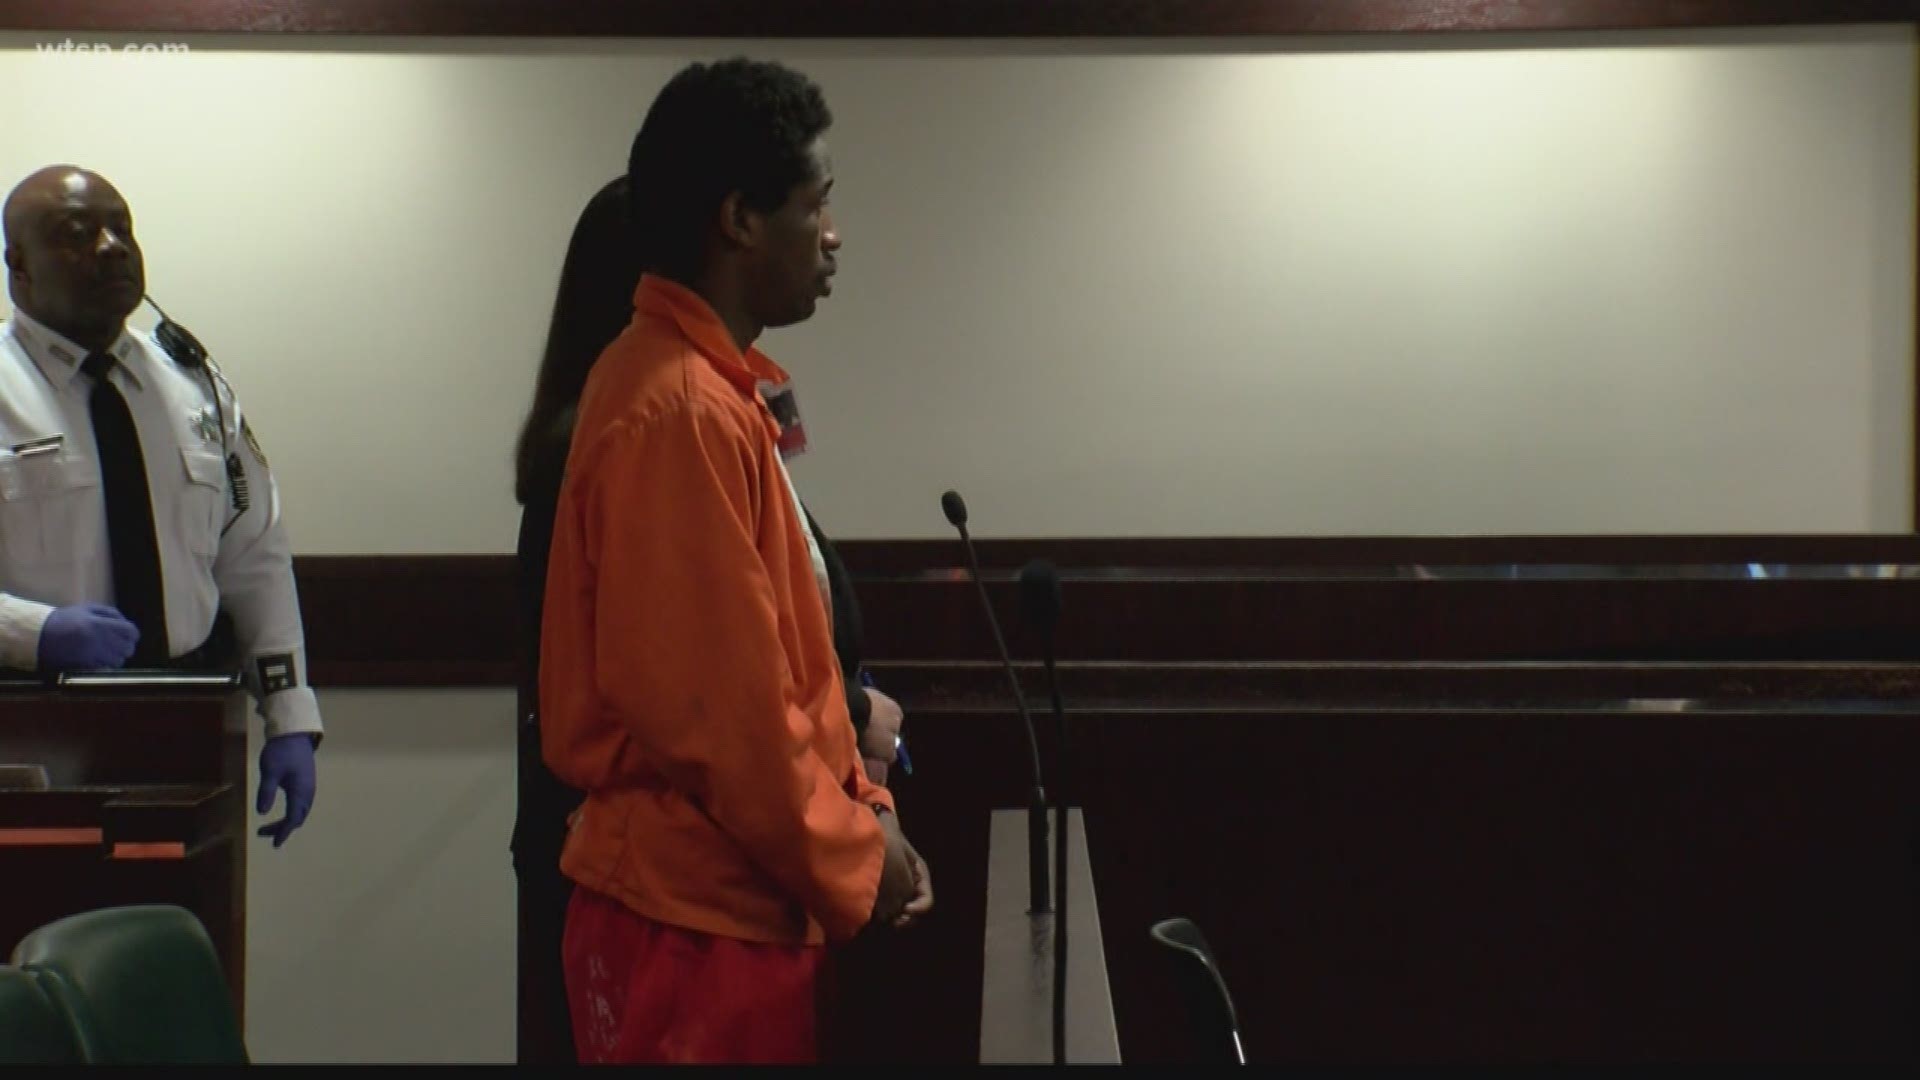 There were some shocking moments in a Hillsborough courtroom during what was supposed to be a basic status hearing for accused Seminole Heights killer Howell Donaldson III.